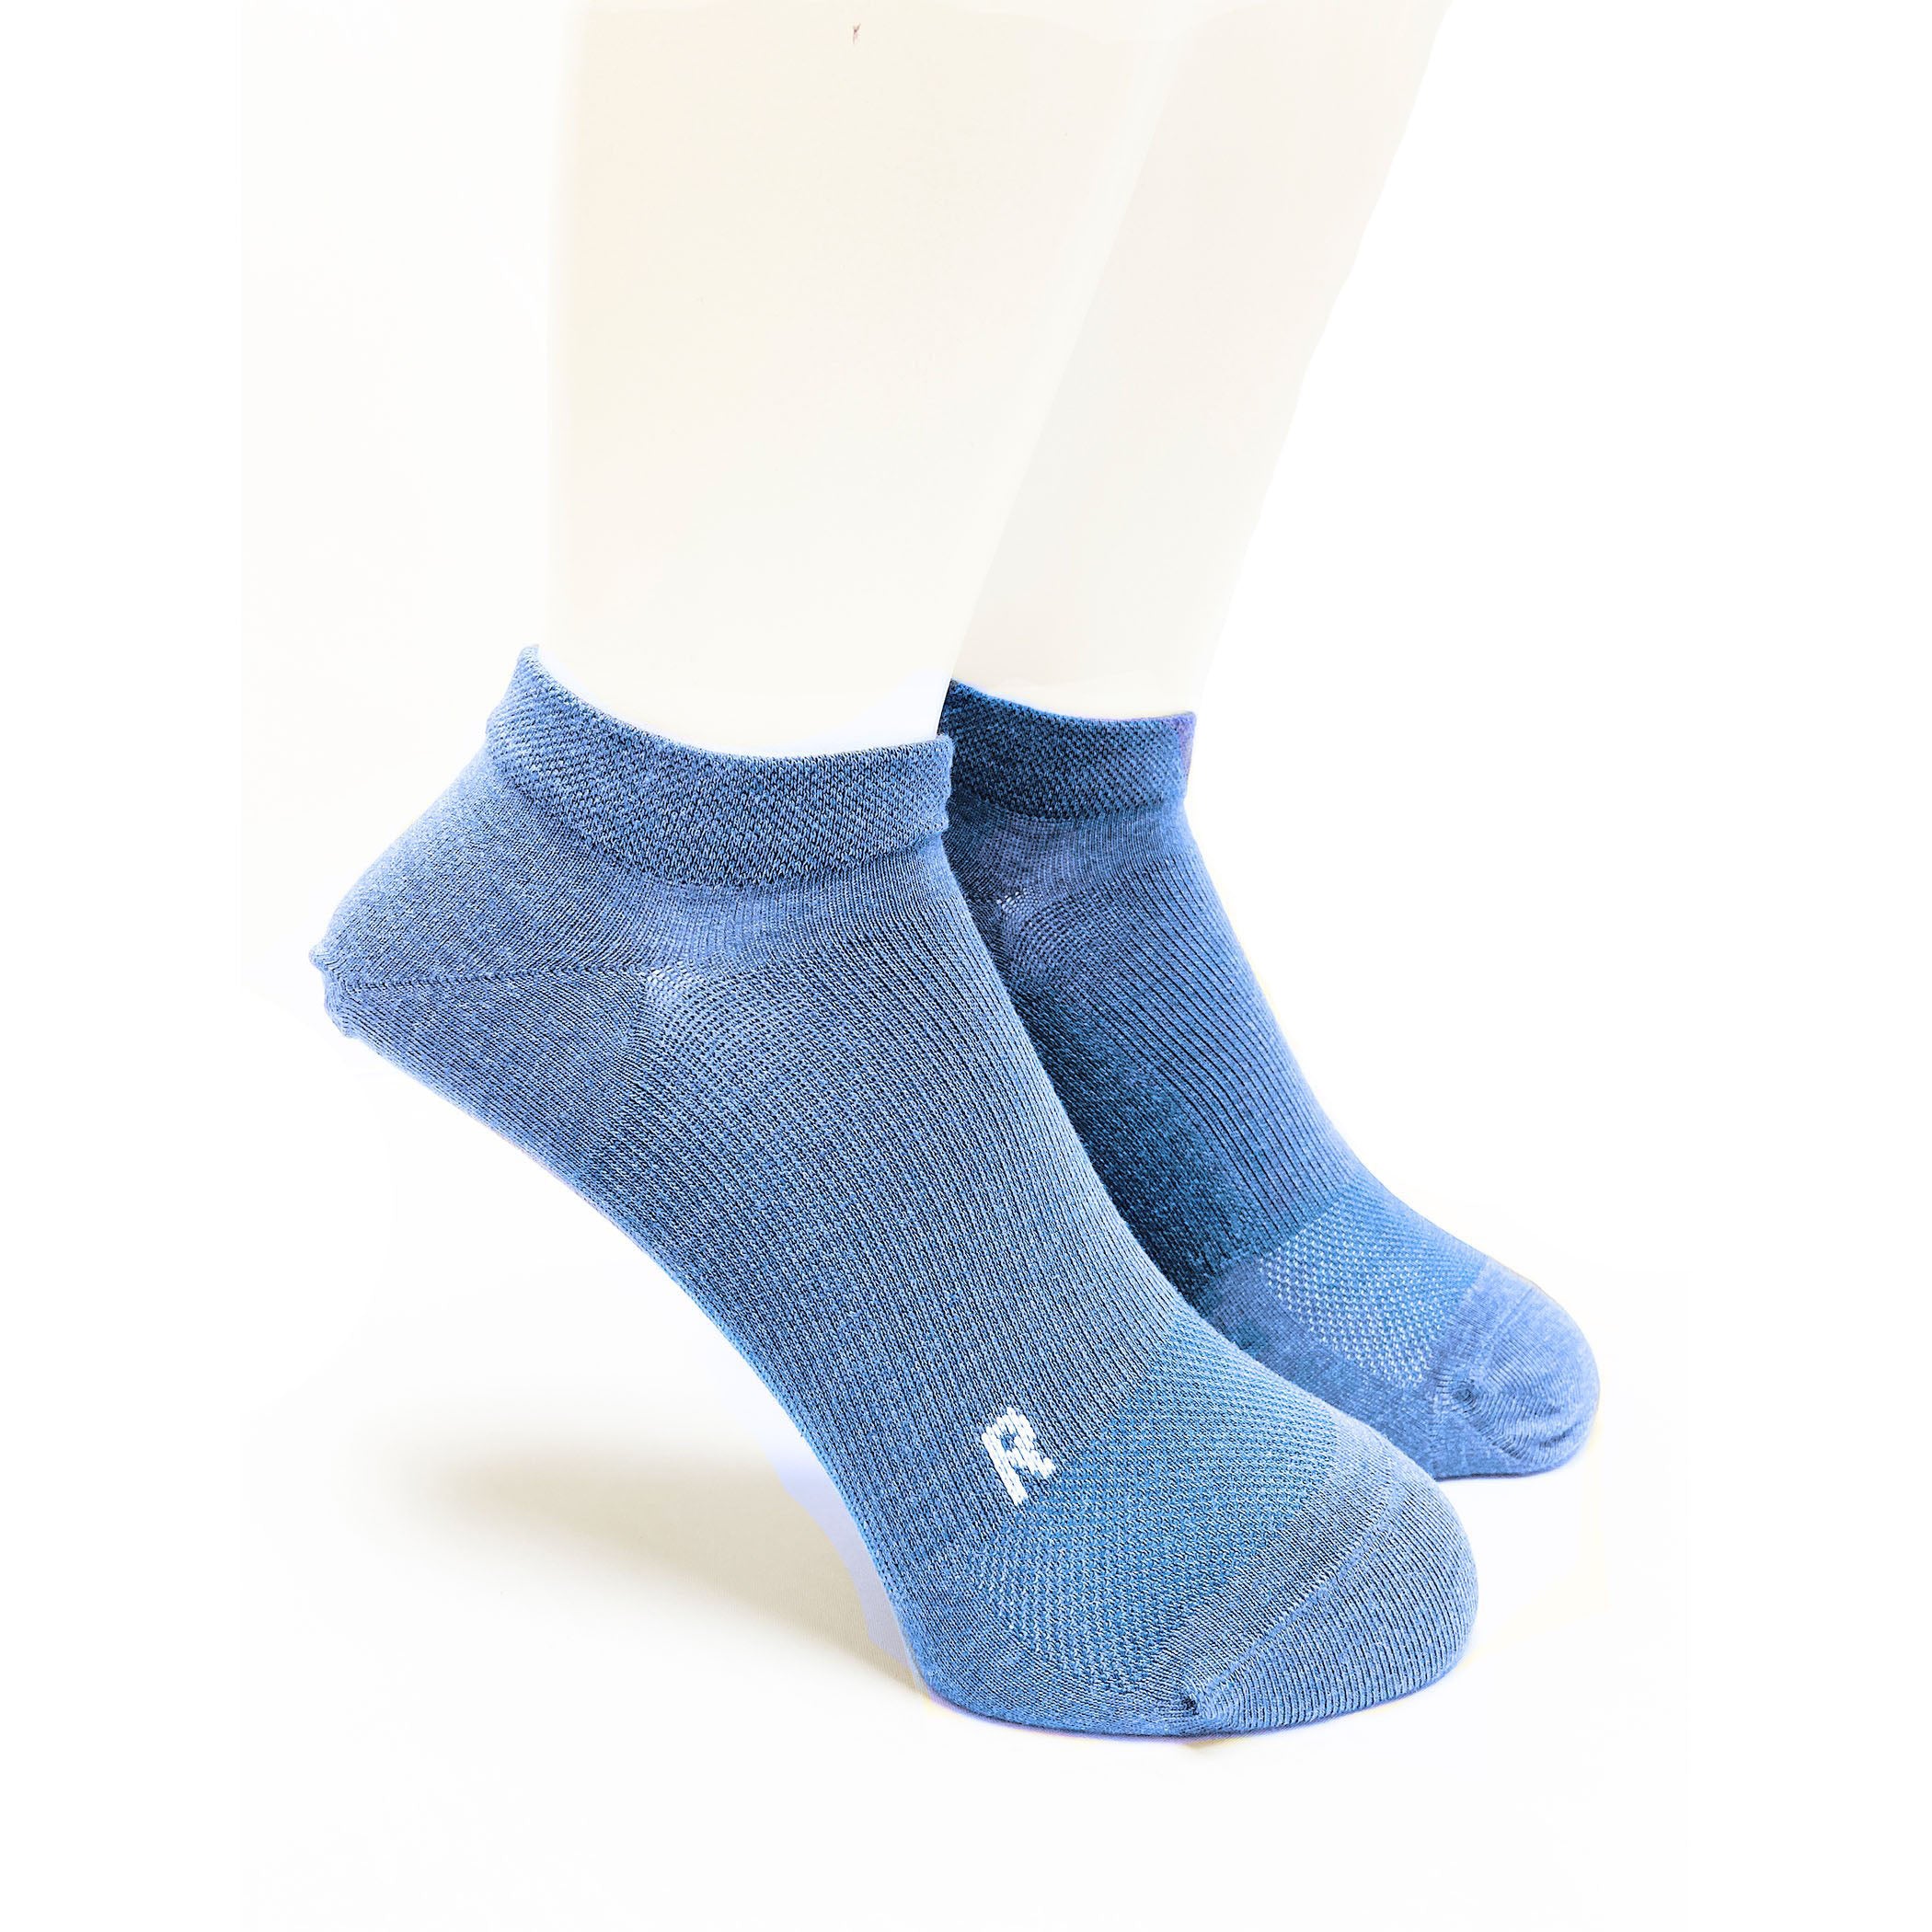 Arch Support Everyday Low Socks - CHERRYSTONEstyle